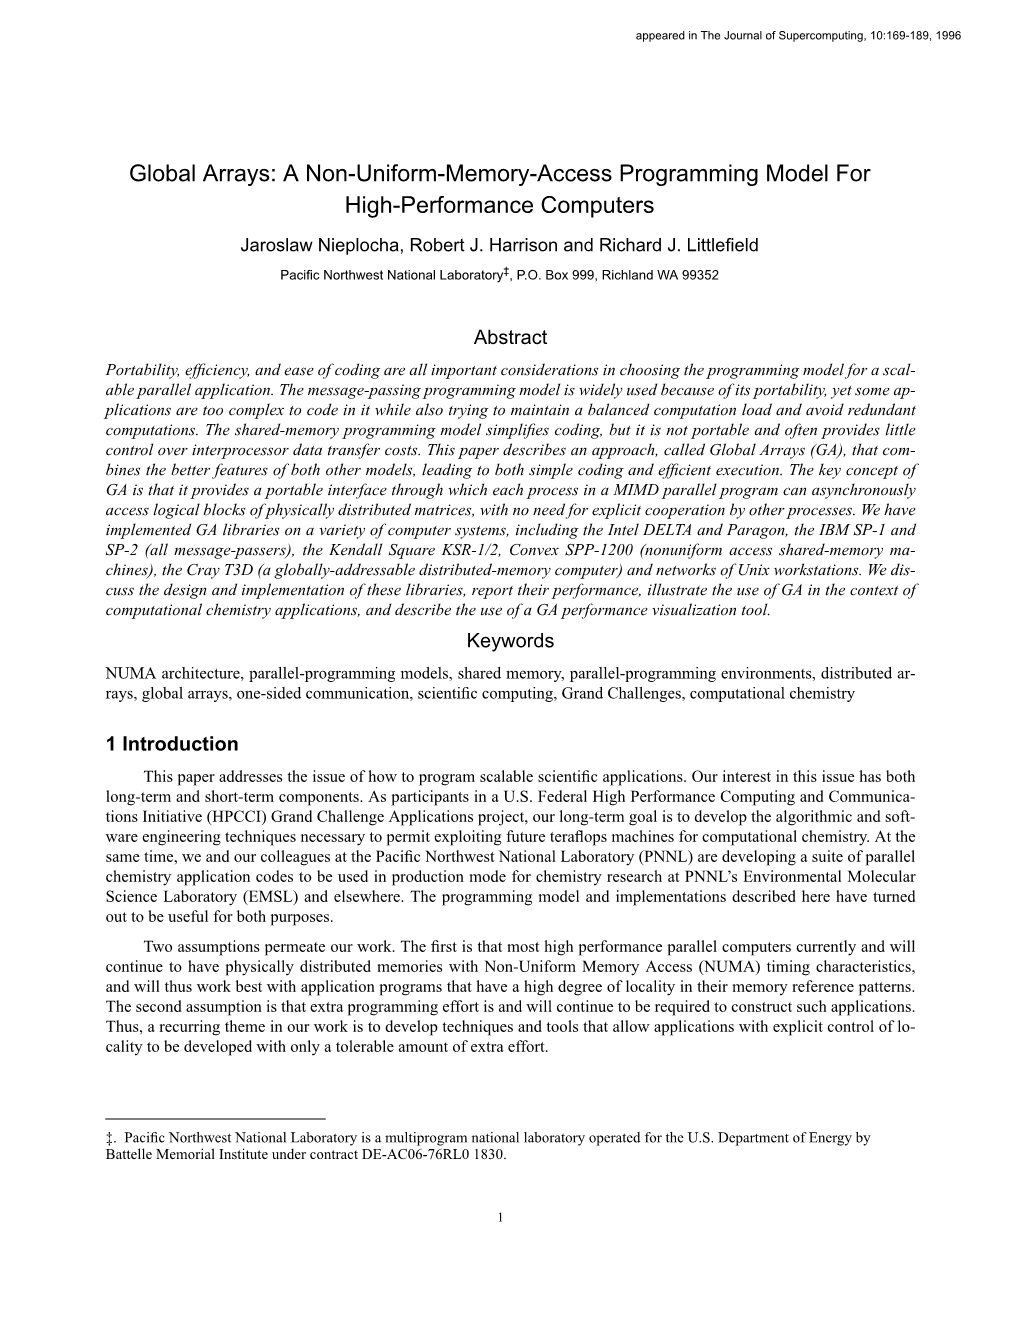 Global Arrays: a Non-Uniform-Memory-Access Programming Model for High-Performance Computers